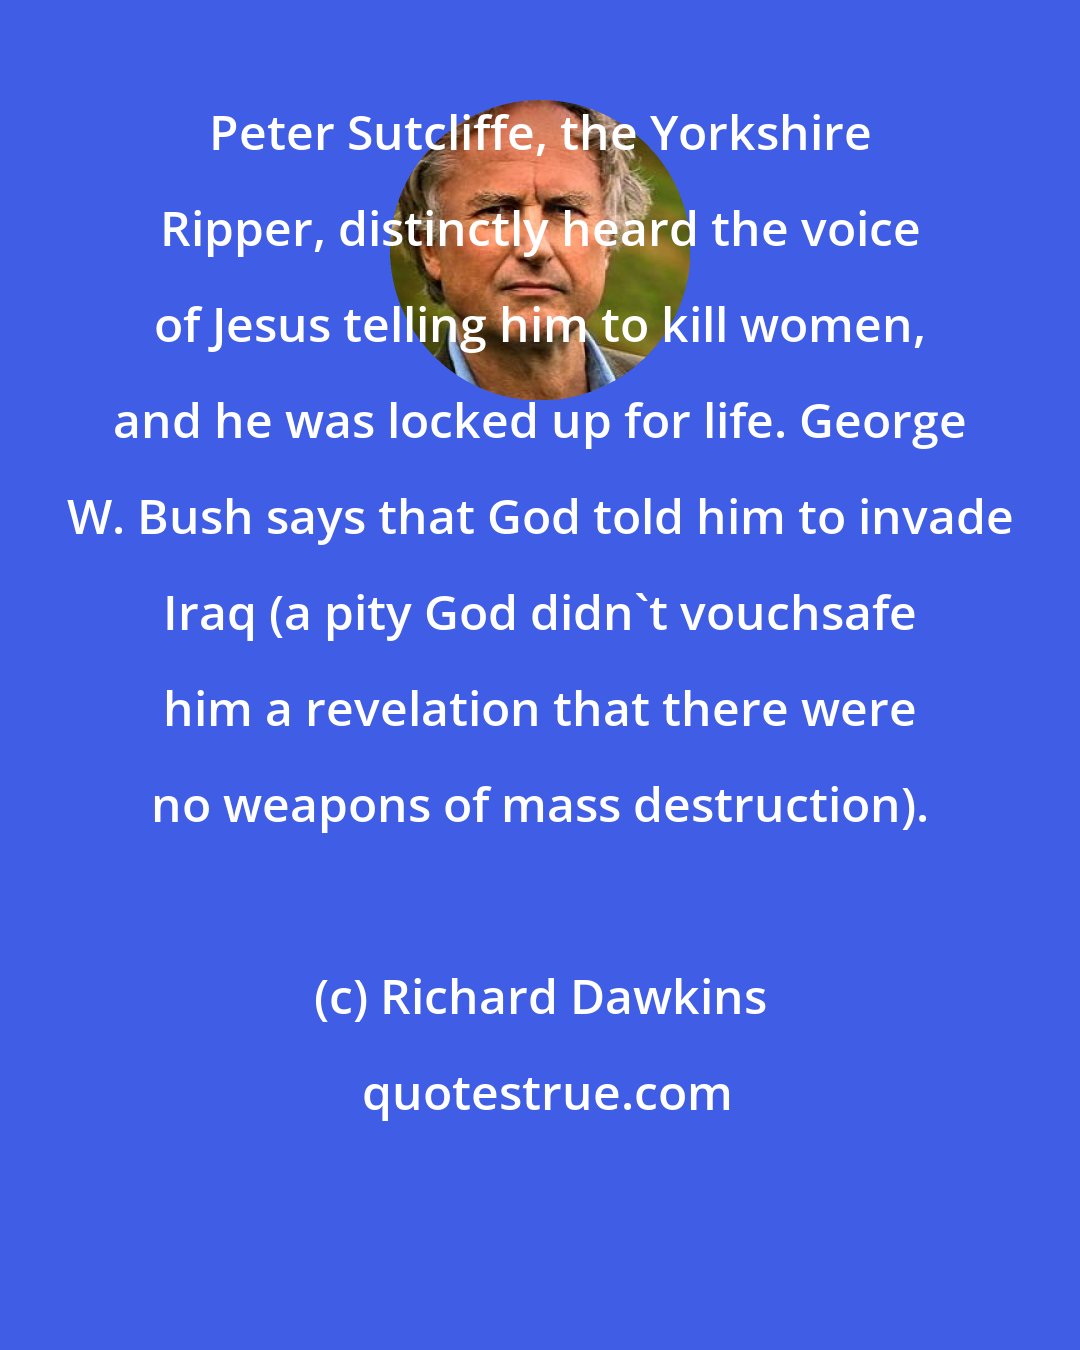 Richard Dawkins: Peter Sutcliffe, the Yorkshire Ripper, distinctly heard the voice of Jesus telling him to kill women, and he was locked up for life. George W. Bush says that God told him to invade Iraq (a pity God didn't vouchsafe him a revelation that there were no weapons of mass destruction).